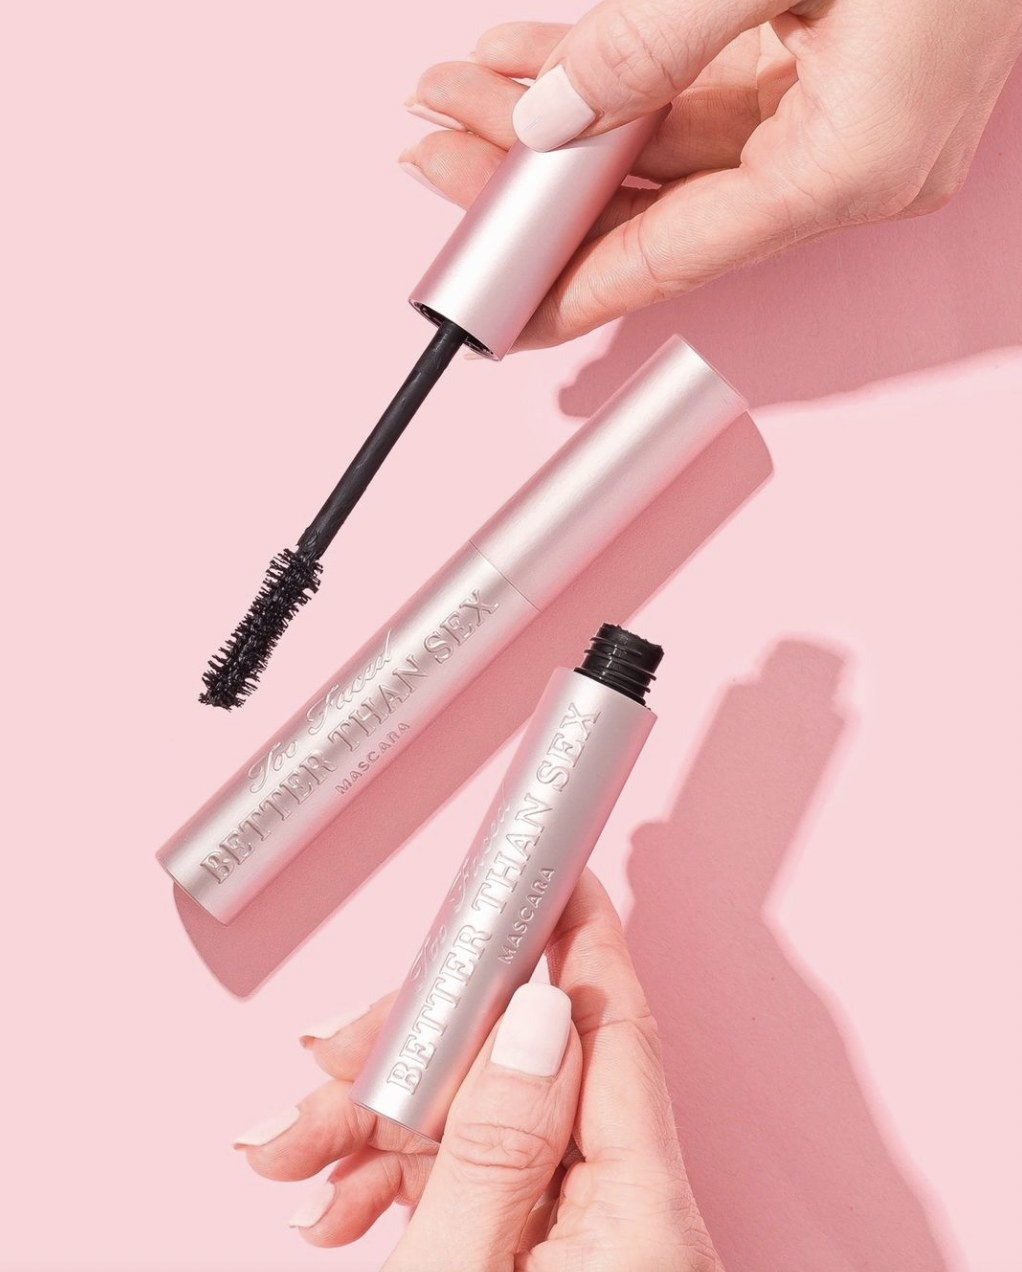 A person holding a tube of mascara with another laid in the background